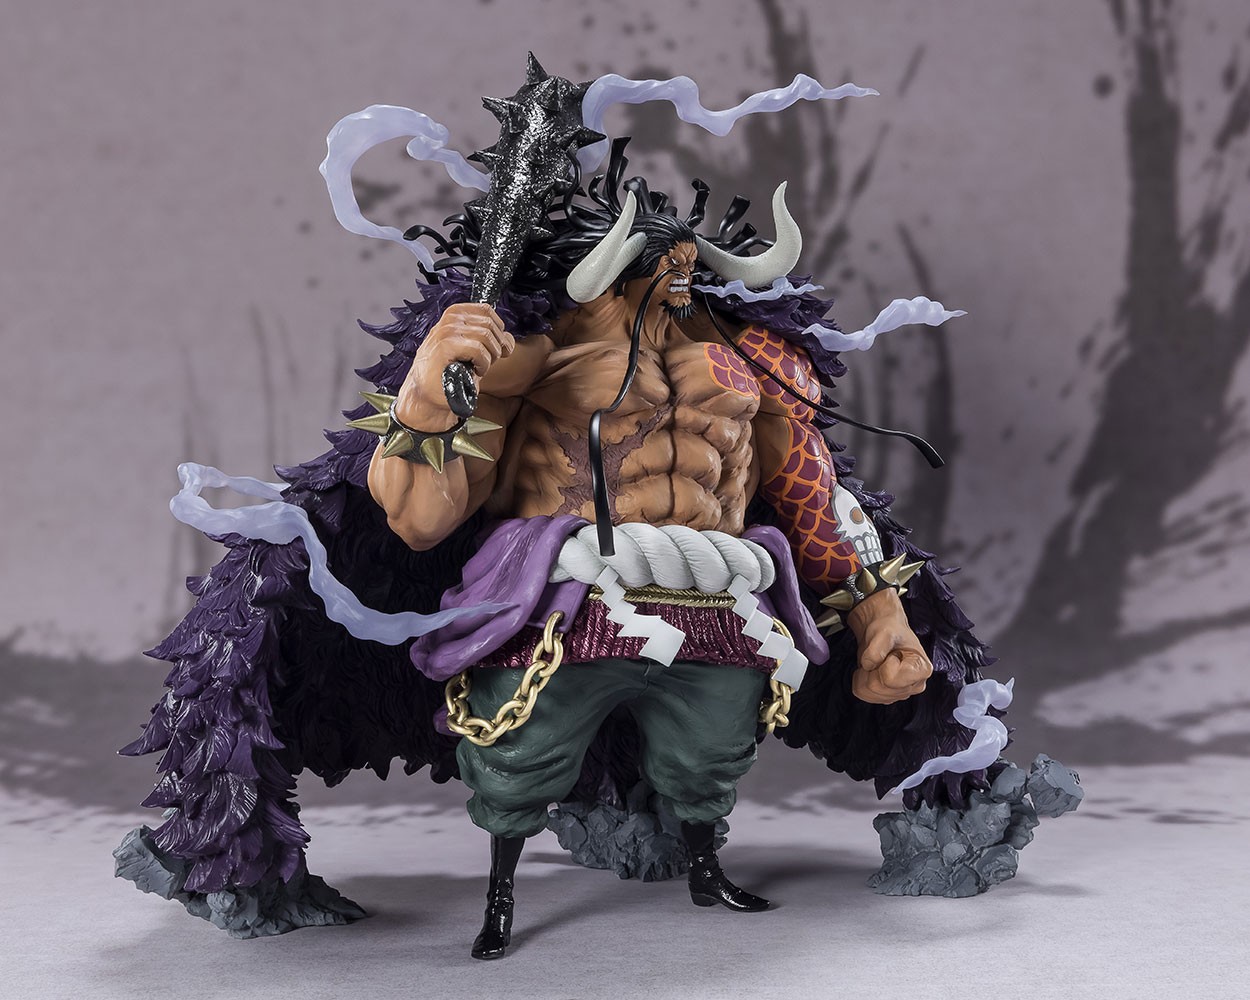 Kaido King of the Beasts (Extra Battle)